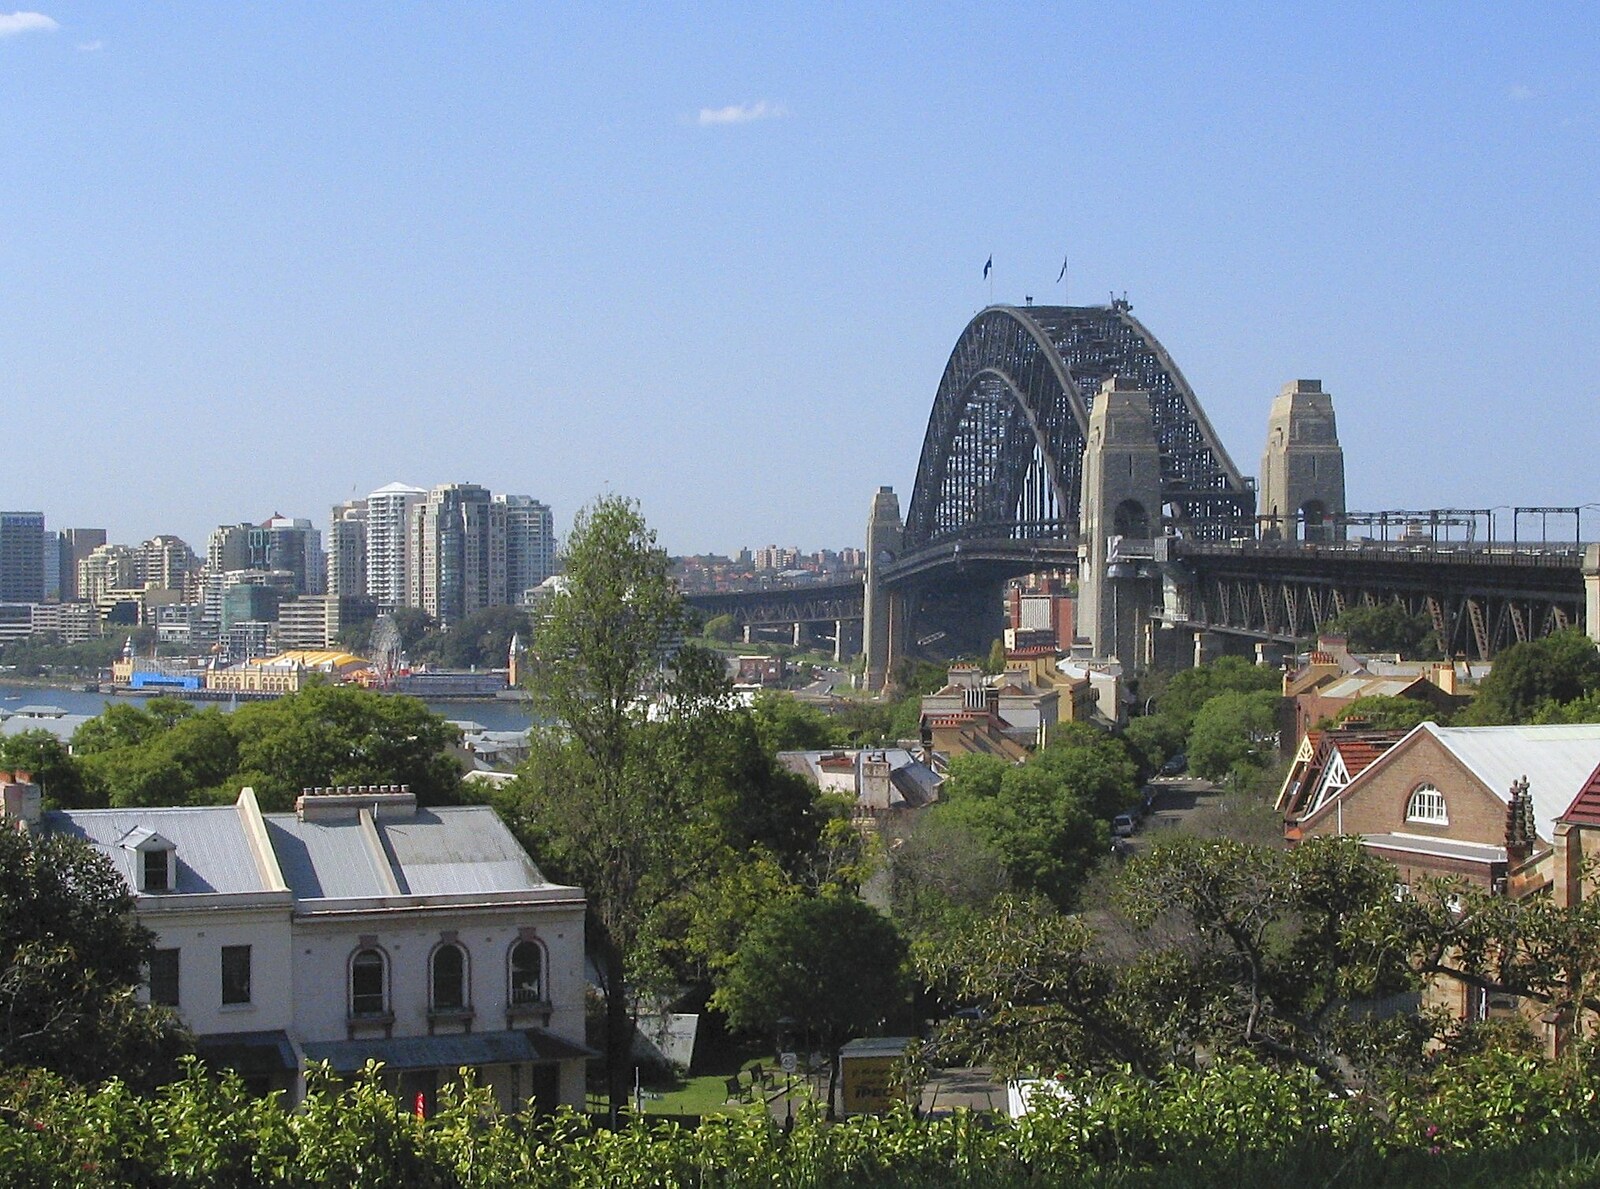 The Bridge, seen from near the observatory from Sydney, New South Wales, Australia - 10th October 2004